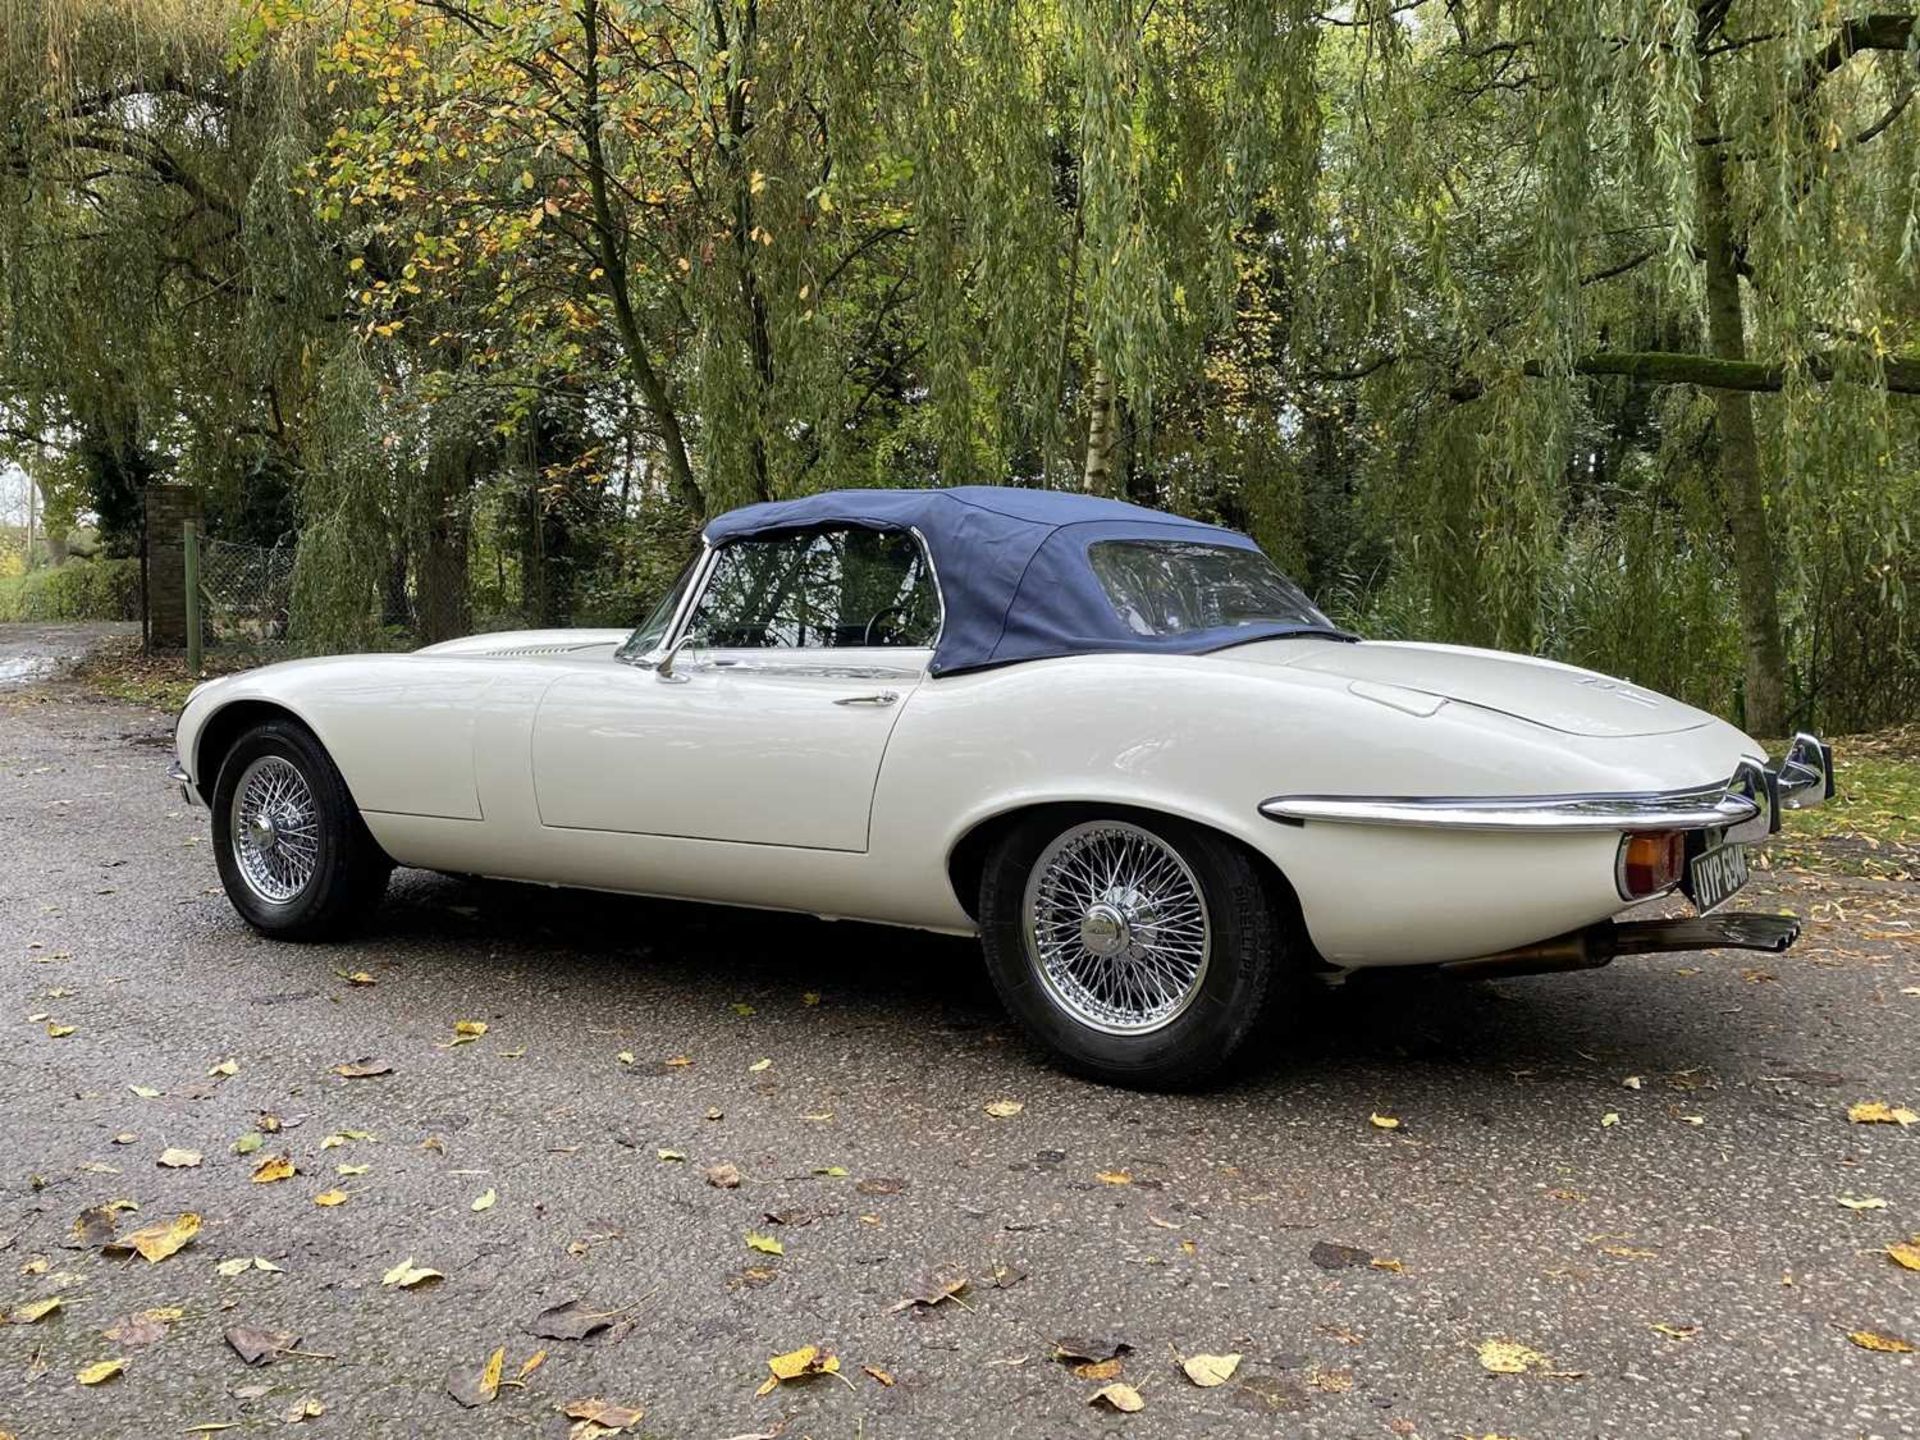 1973 Jaguar E-Type V12 Roadster As seen in Only Fools and Horses - Image 45 of 105